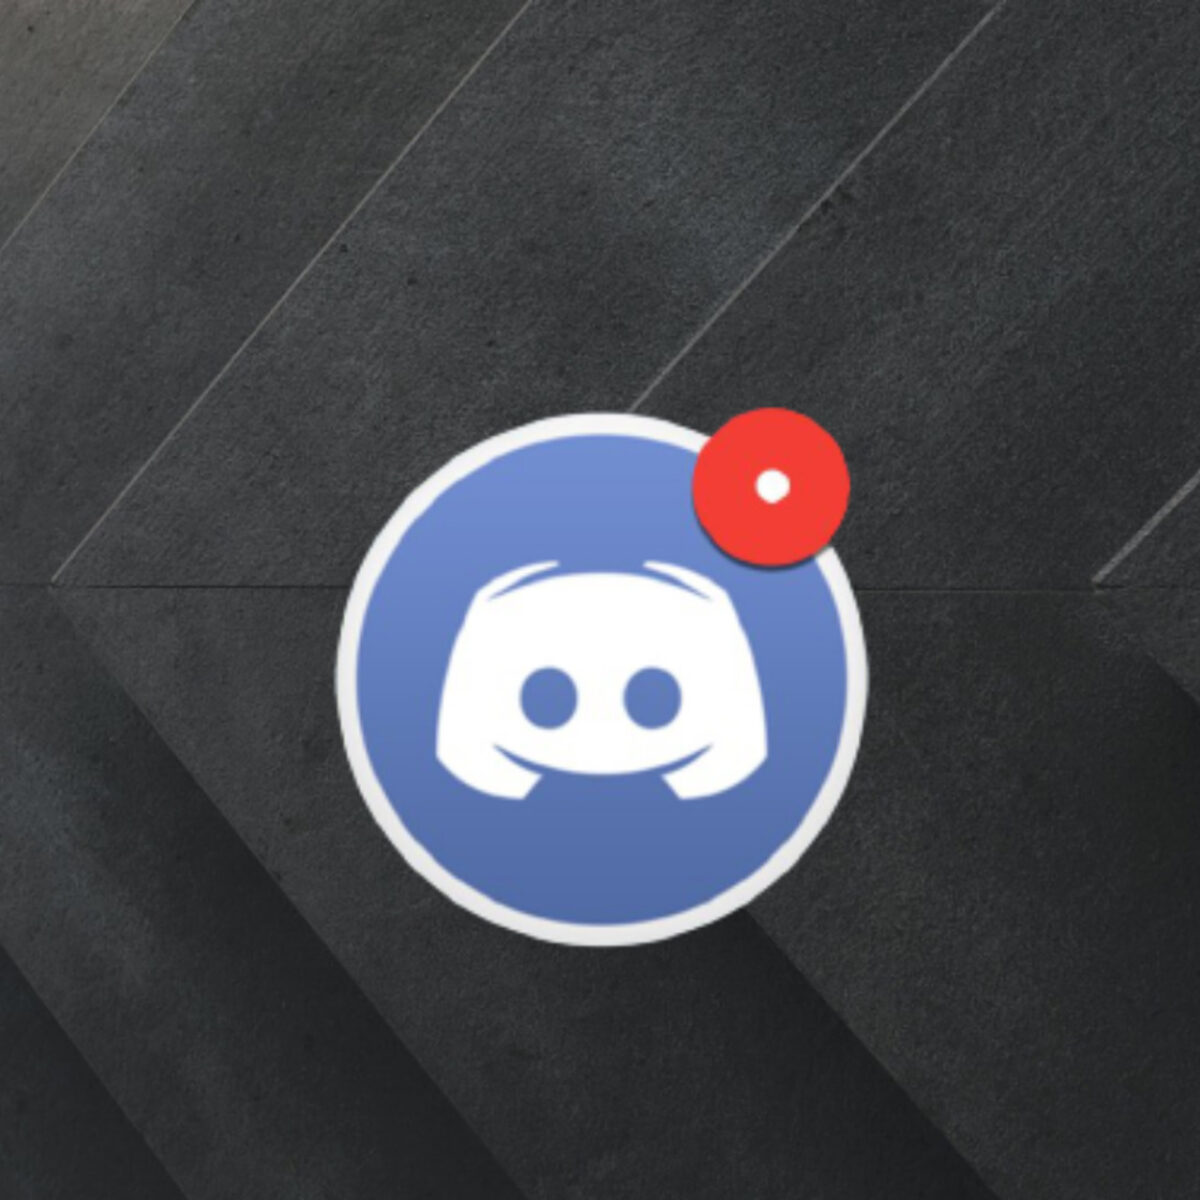 Red on Discord Icon: What means & How to Get Rid of It